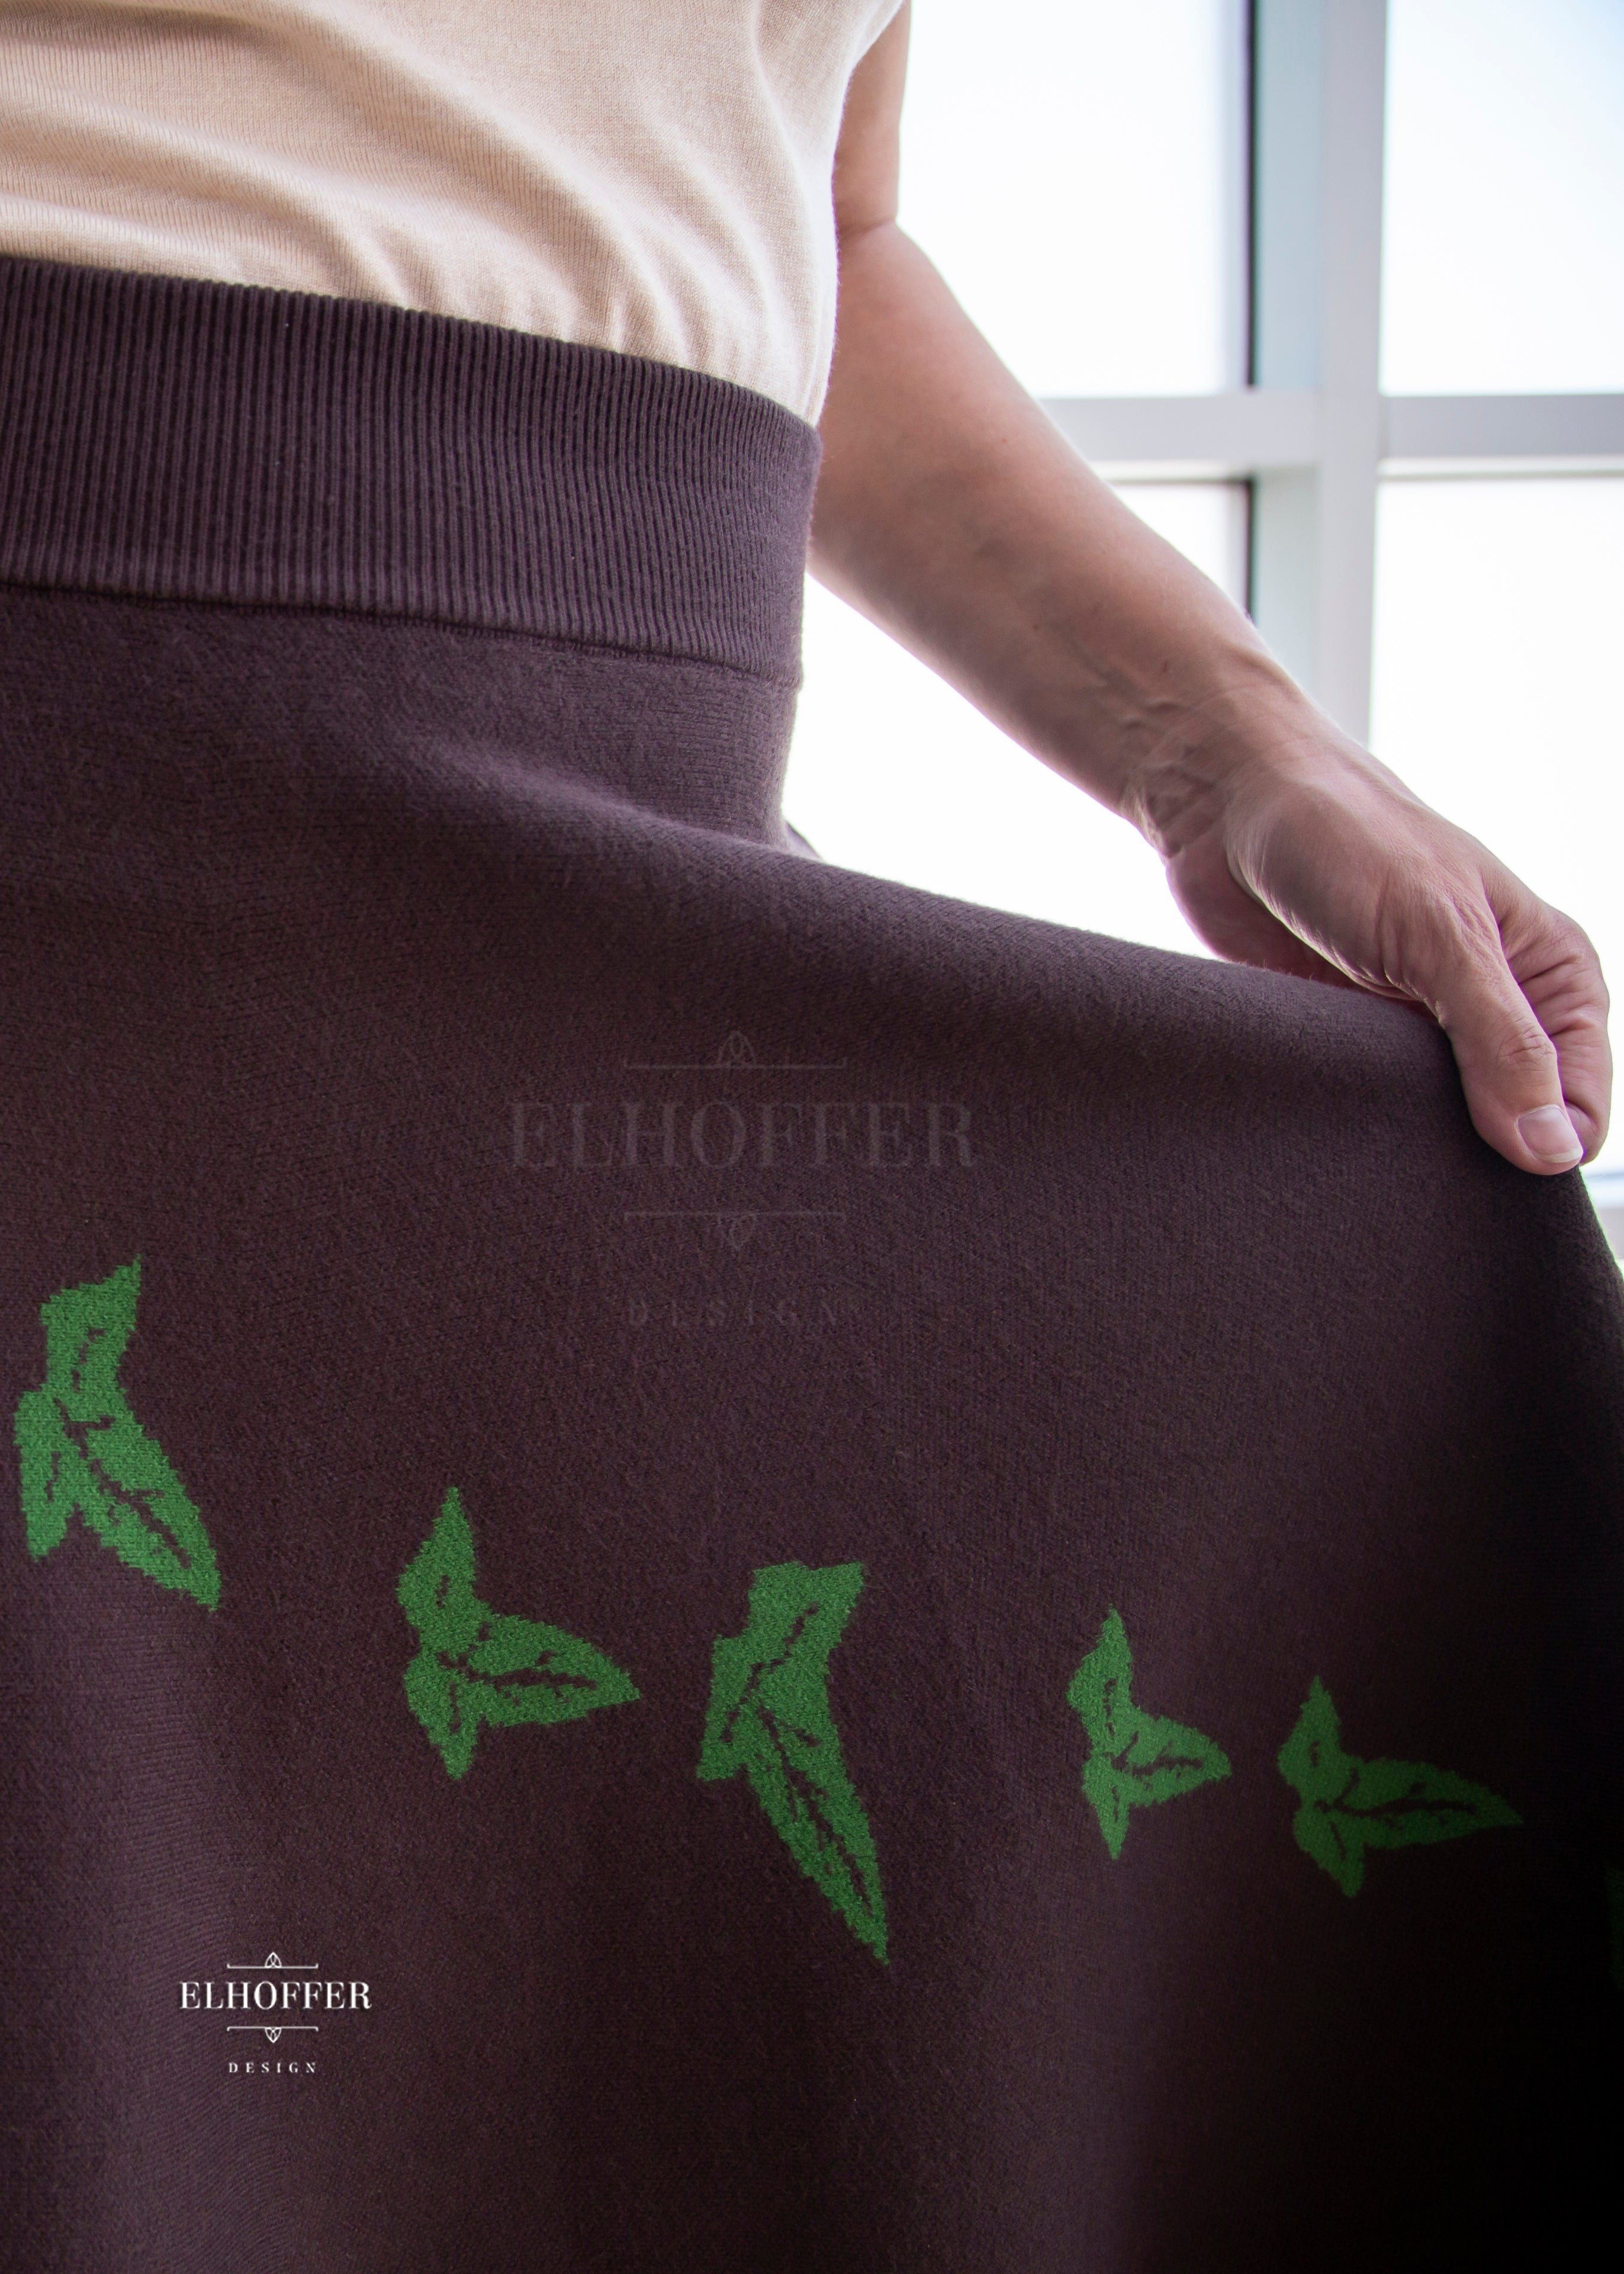 A close up of the green leaf design on the brown knit skirt